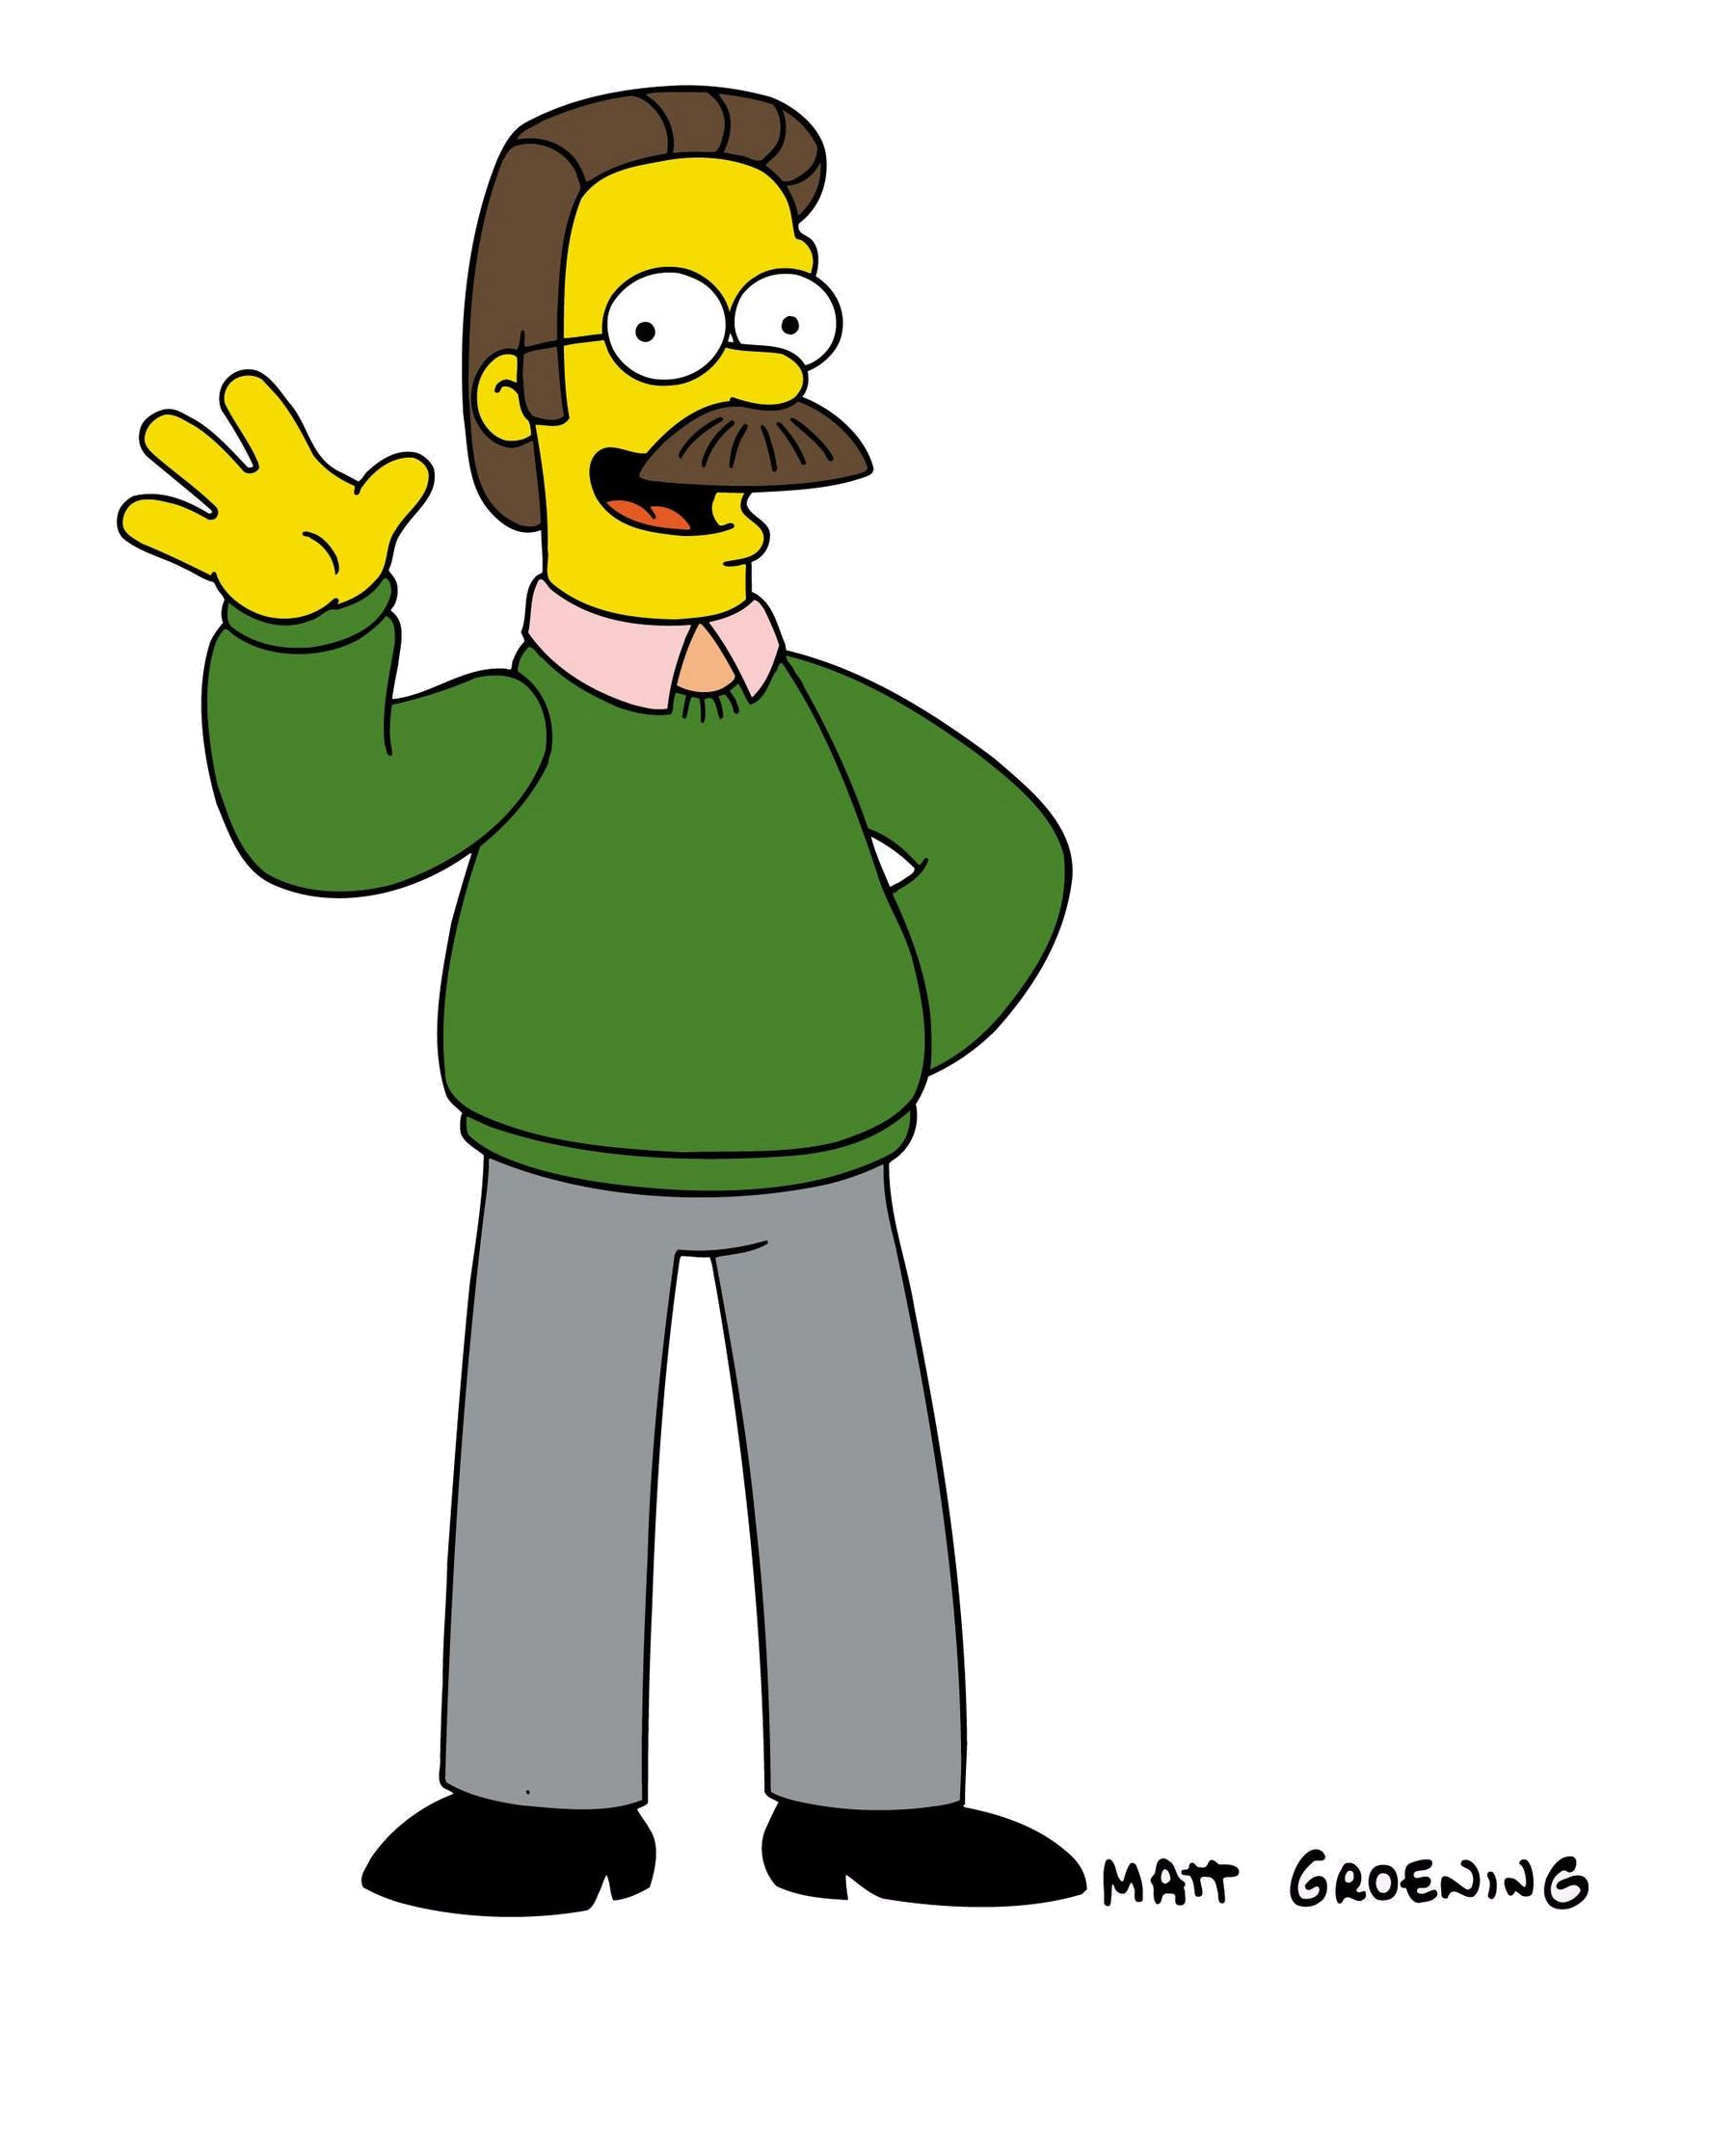 http://static4.wikia.nocookie.net/__cb20110623200421/lossimpson/es/images/8/84/Ned_Flanders.png